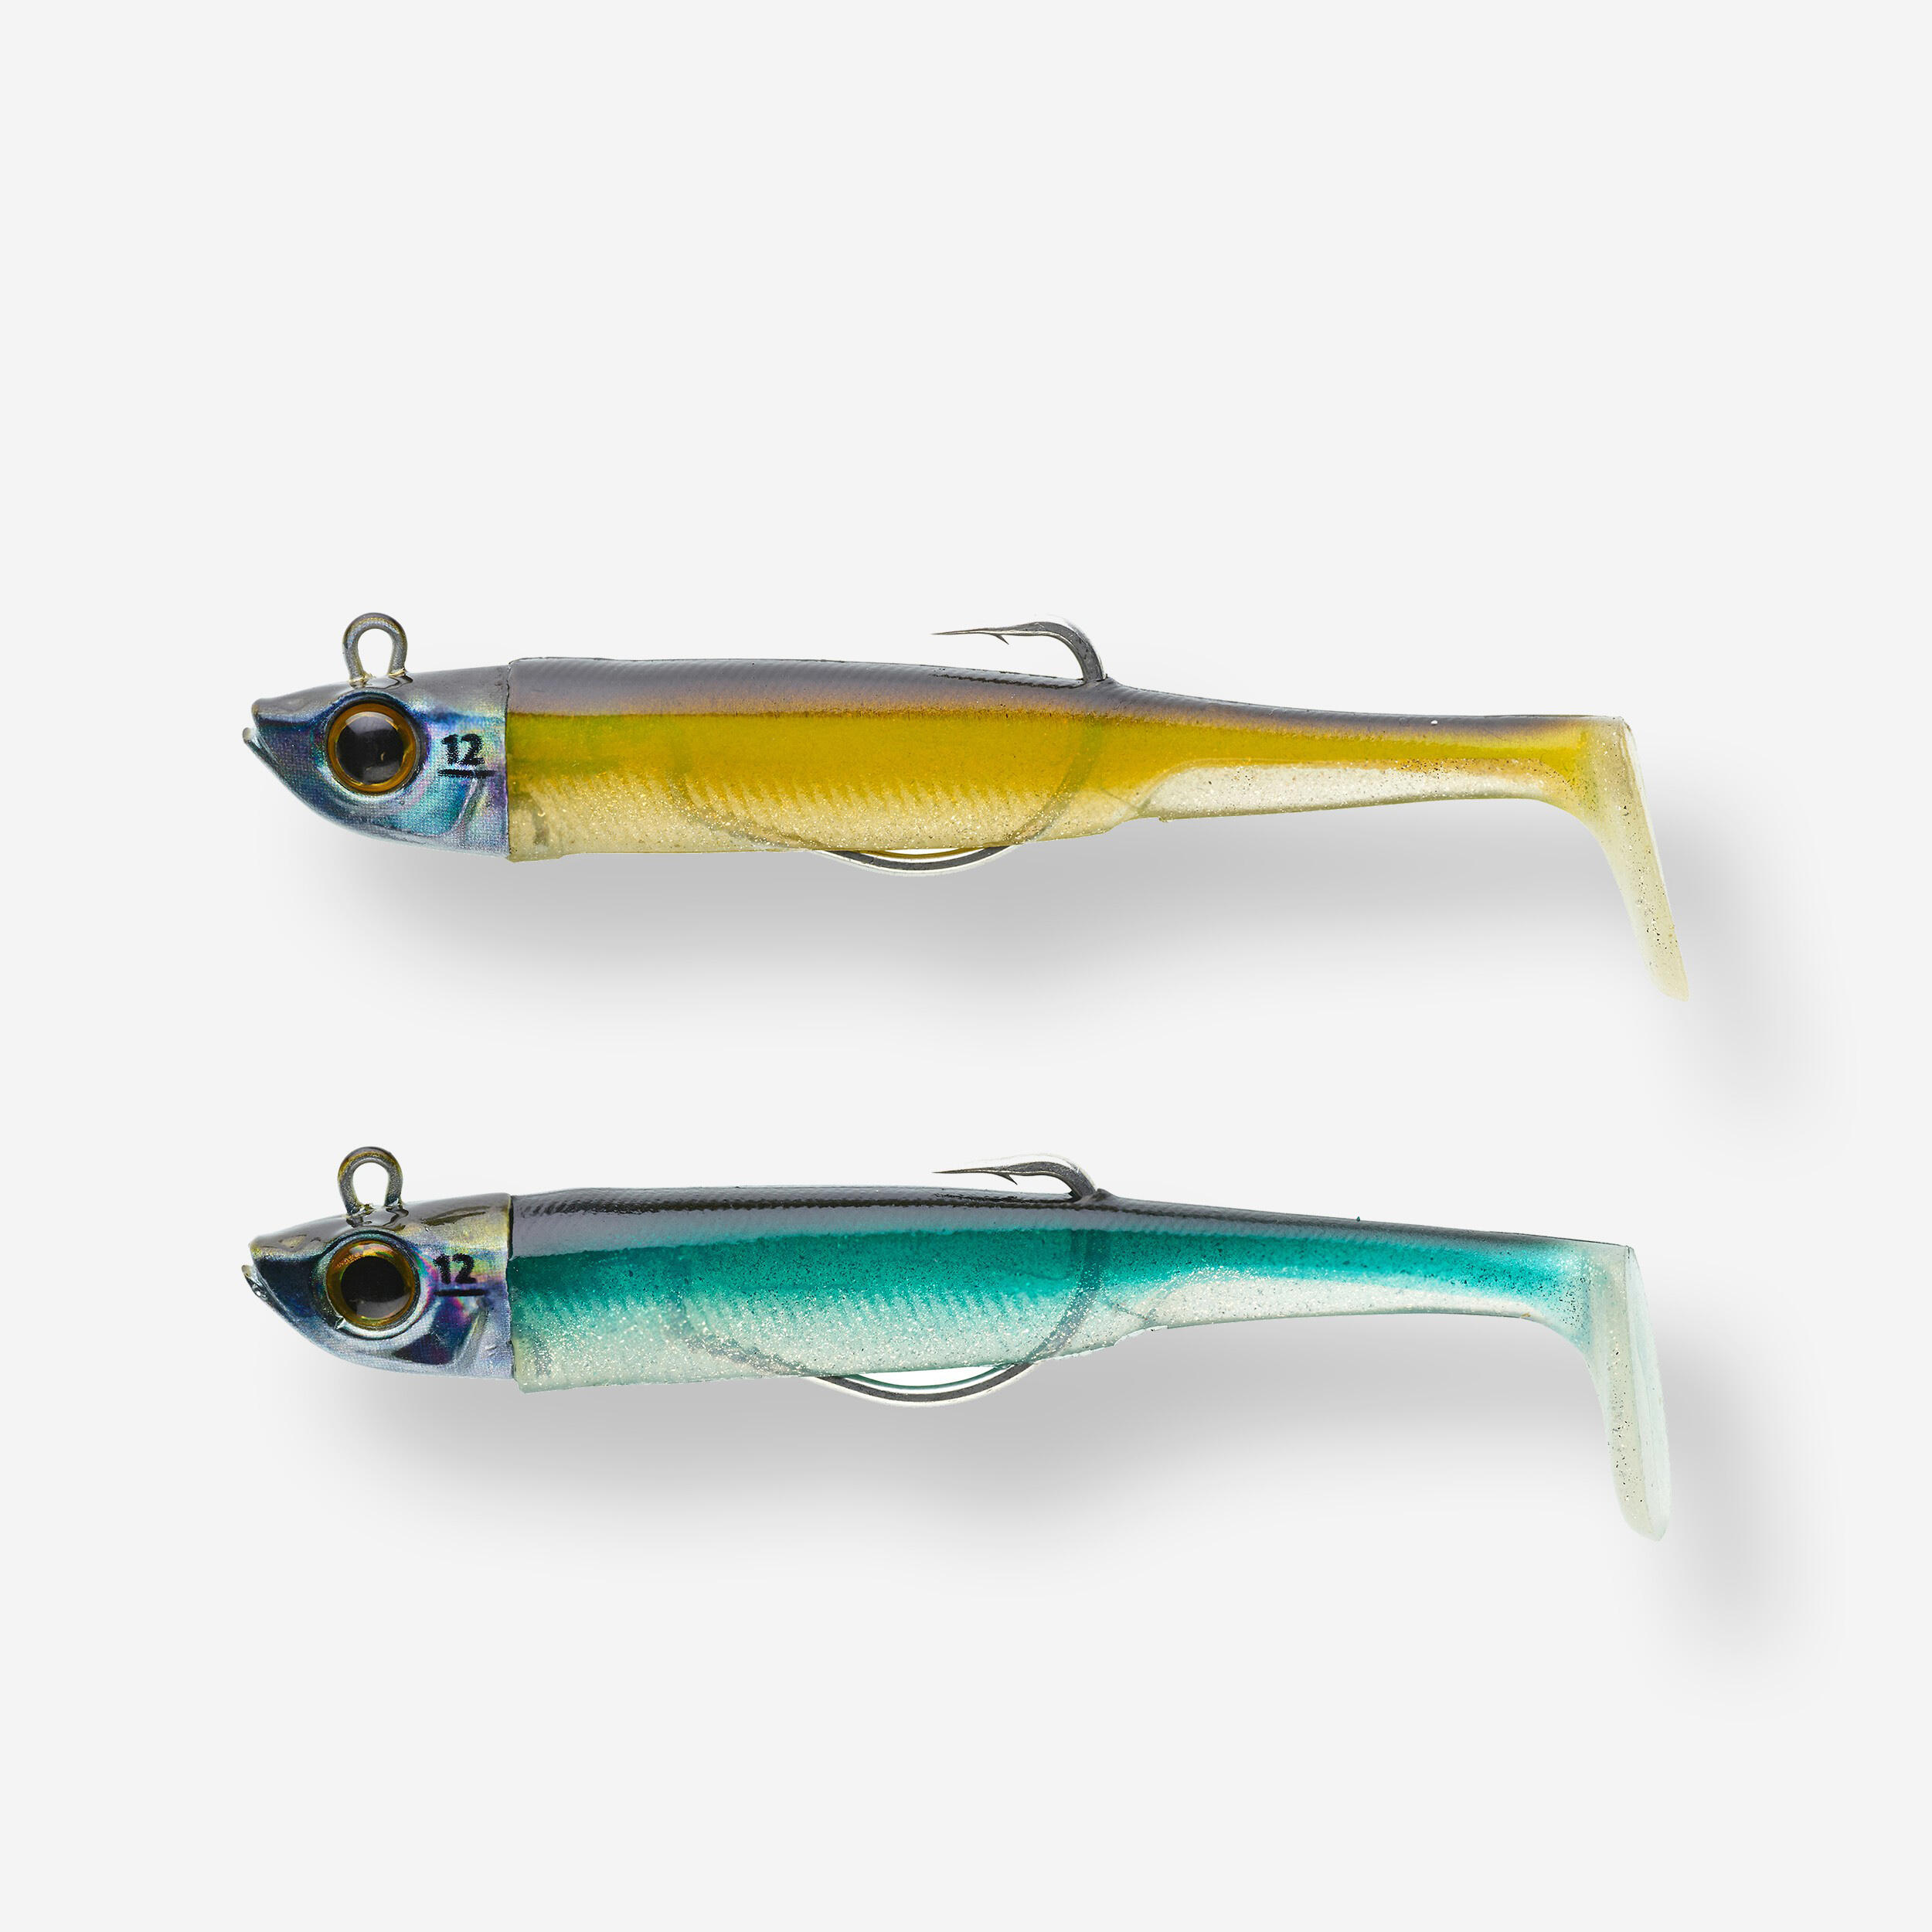 Ancho 90 Sea Fishing Anchovy Shad Soft Lure 5/12 oz - CAPERLAN